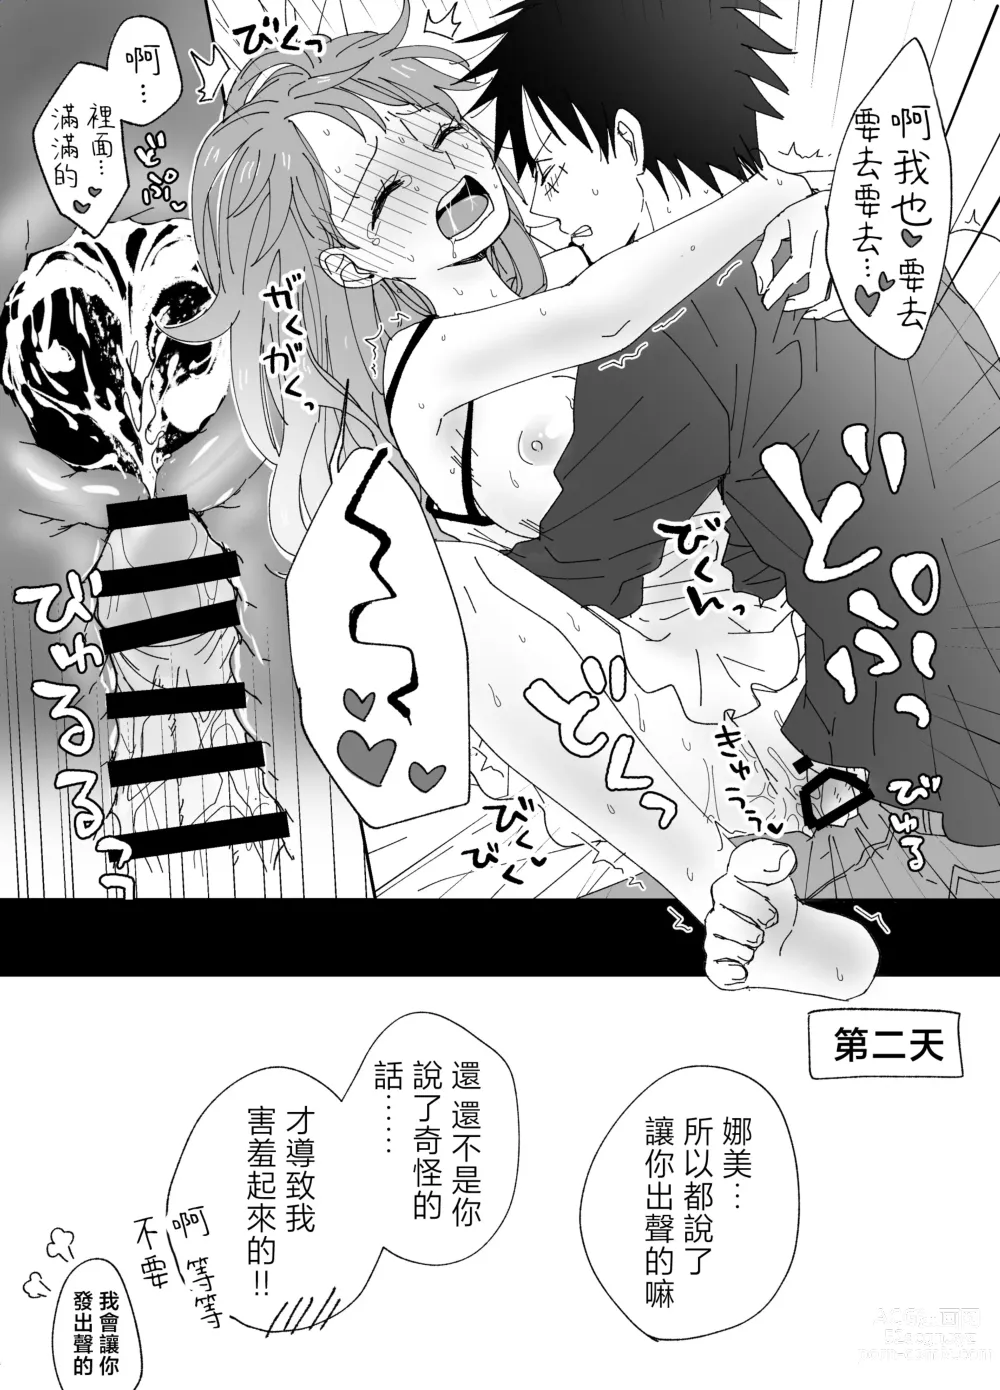 Page 35 of doujinshi 路娜日志 1